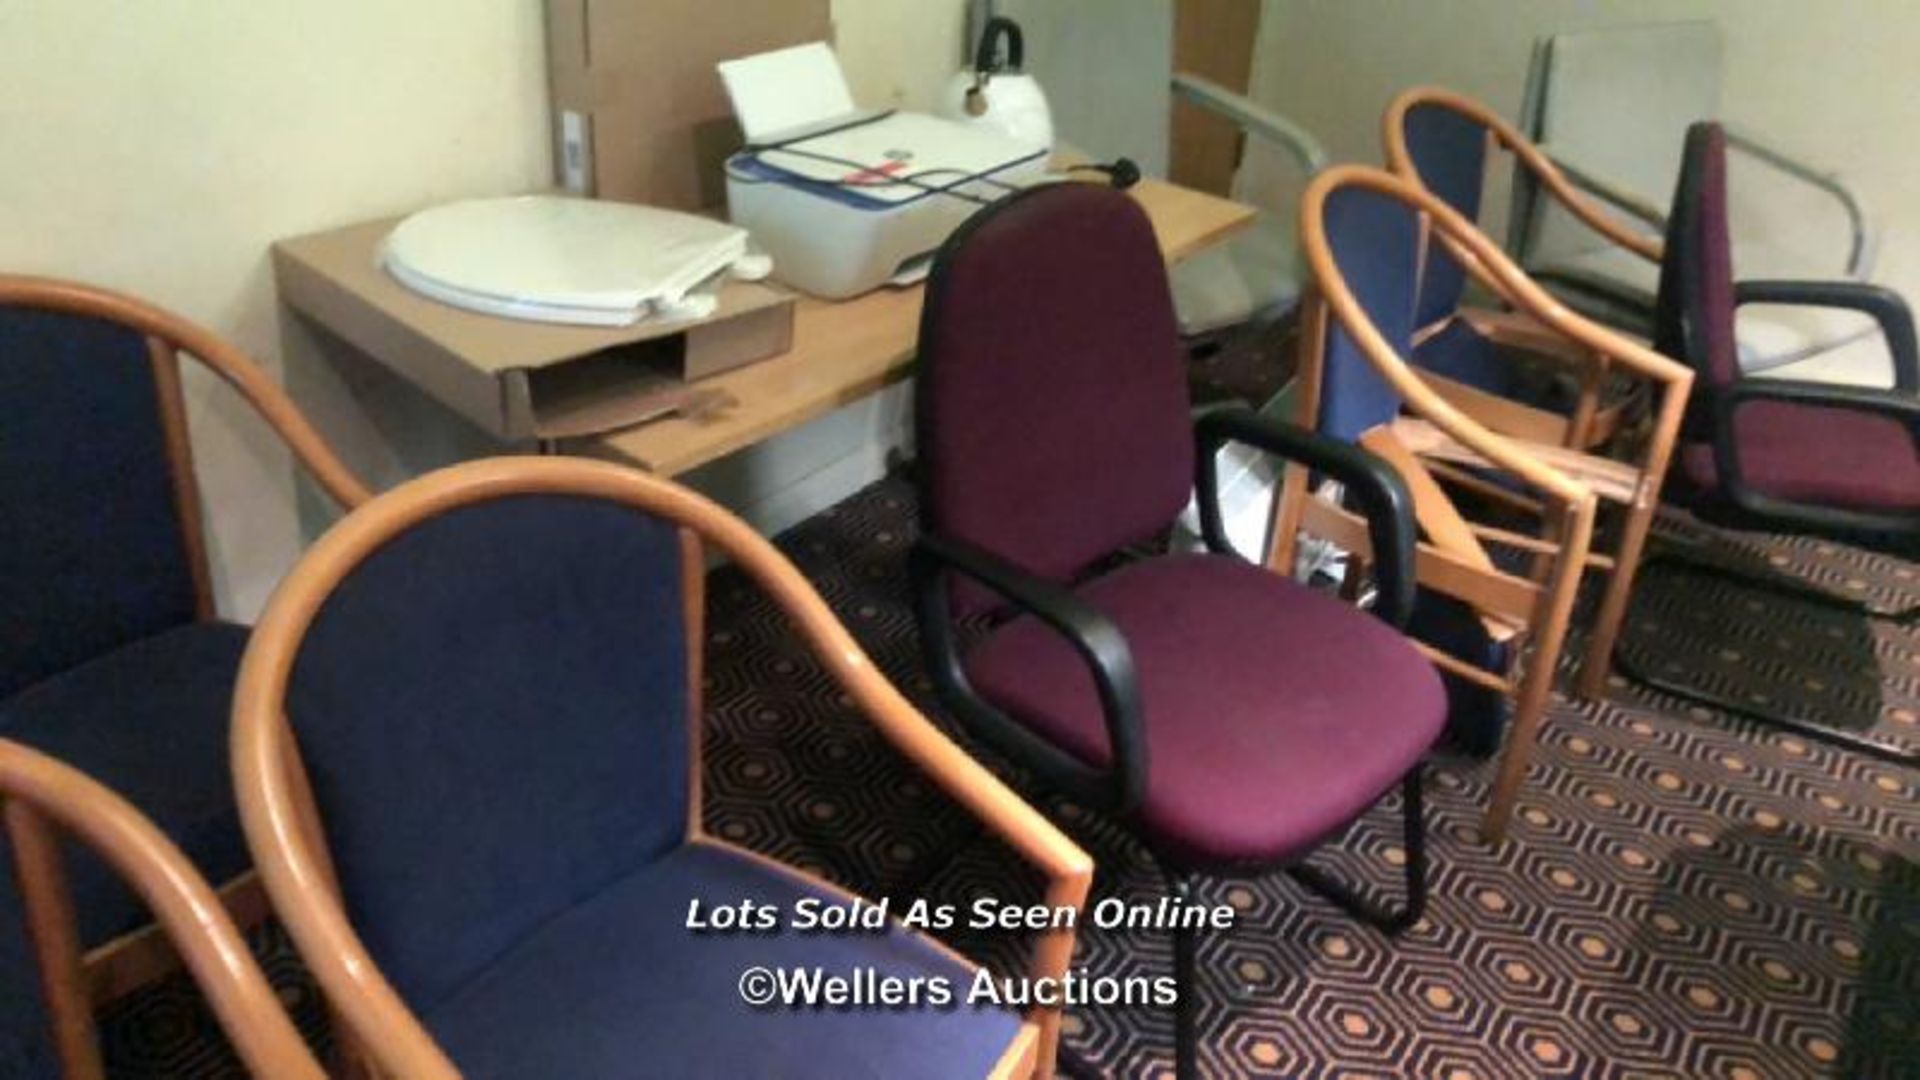 ASSORTED JOB LOT OF AS FOUND CHAIRS, KETTLE, TOILET SEAT, HP DESKJET 2630 PRINTER AND DESK, BUYER - Image 2 of 4